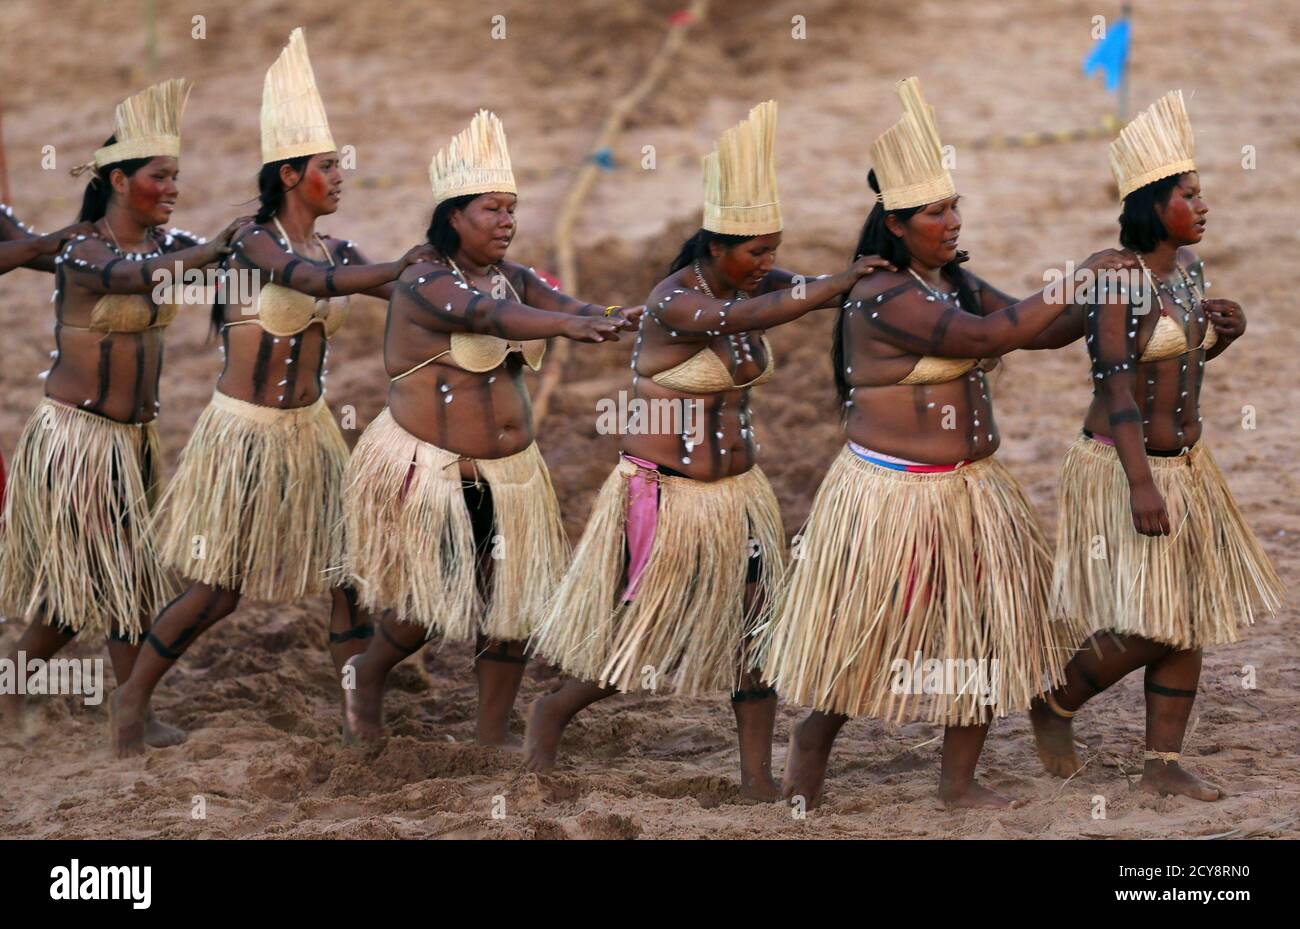 Members of Brazilian indigenous ethnic group Xerente attend the XII Games  of the Indigenous People, in Cuiaba November 14, 2013. Forty eight  Brazilian Indigenous tribes will present their cultural rituals and compete